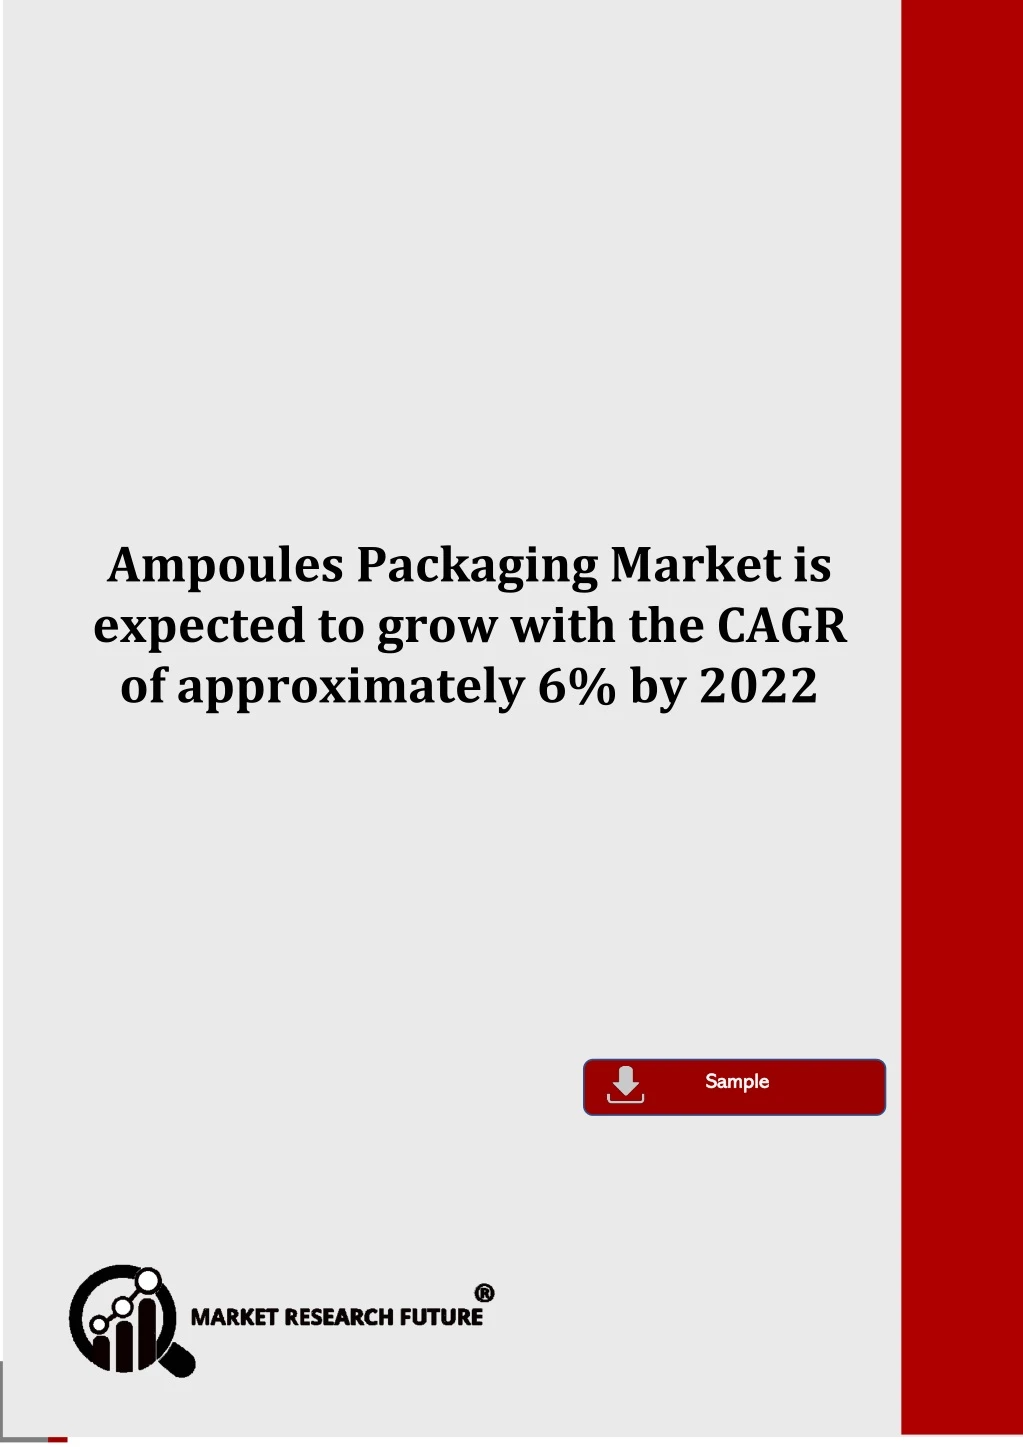 ampoules packaging market is expected to grow